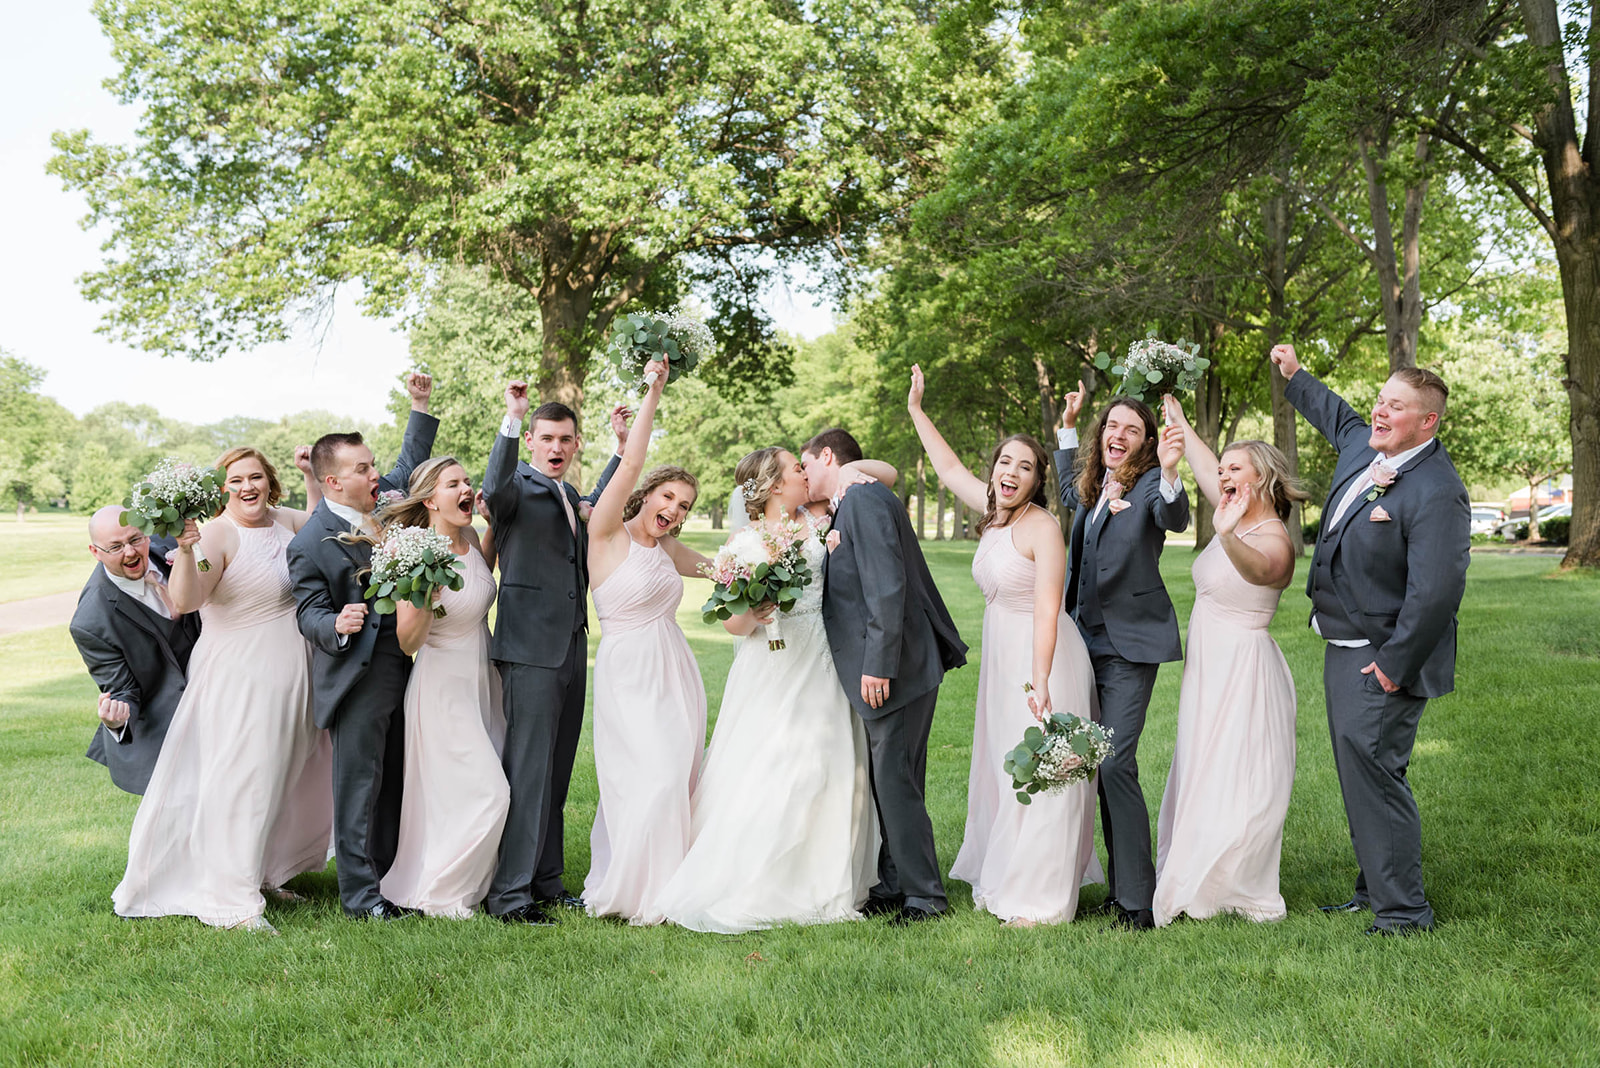 Wedding at Worthington Hills Country Club, Worthington, Ohio Sweet Williams Photography is a wedding and portrait photographer based in Nashville, Tennessee.